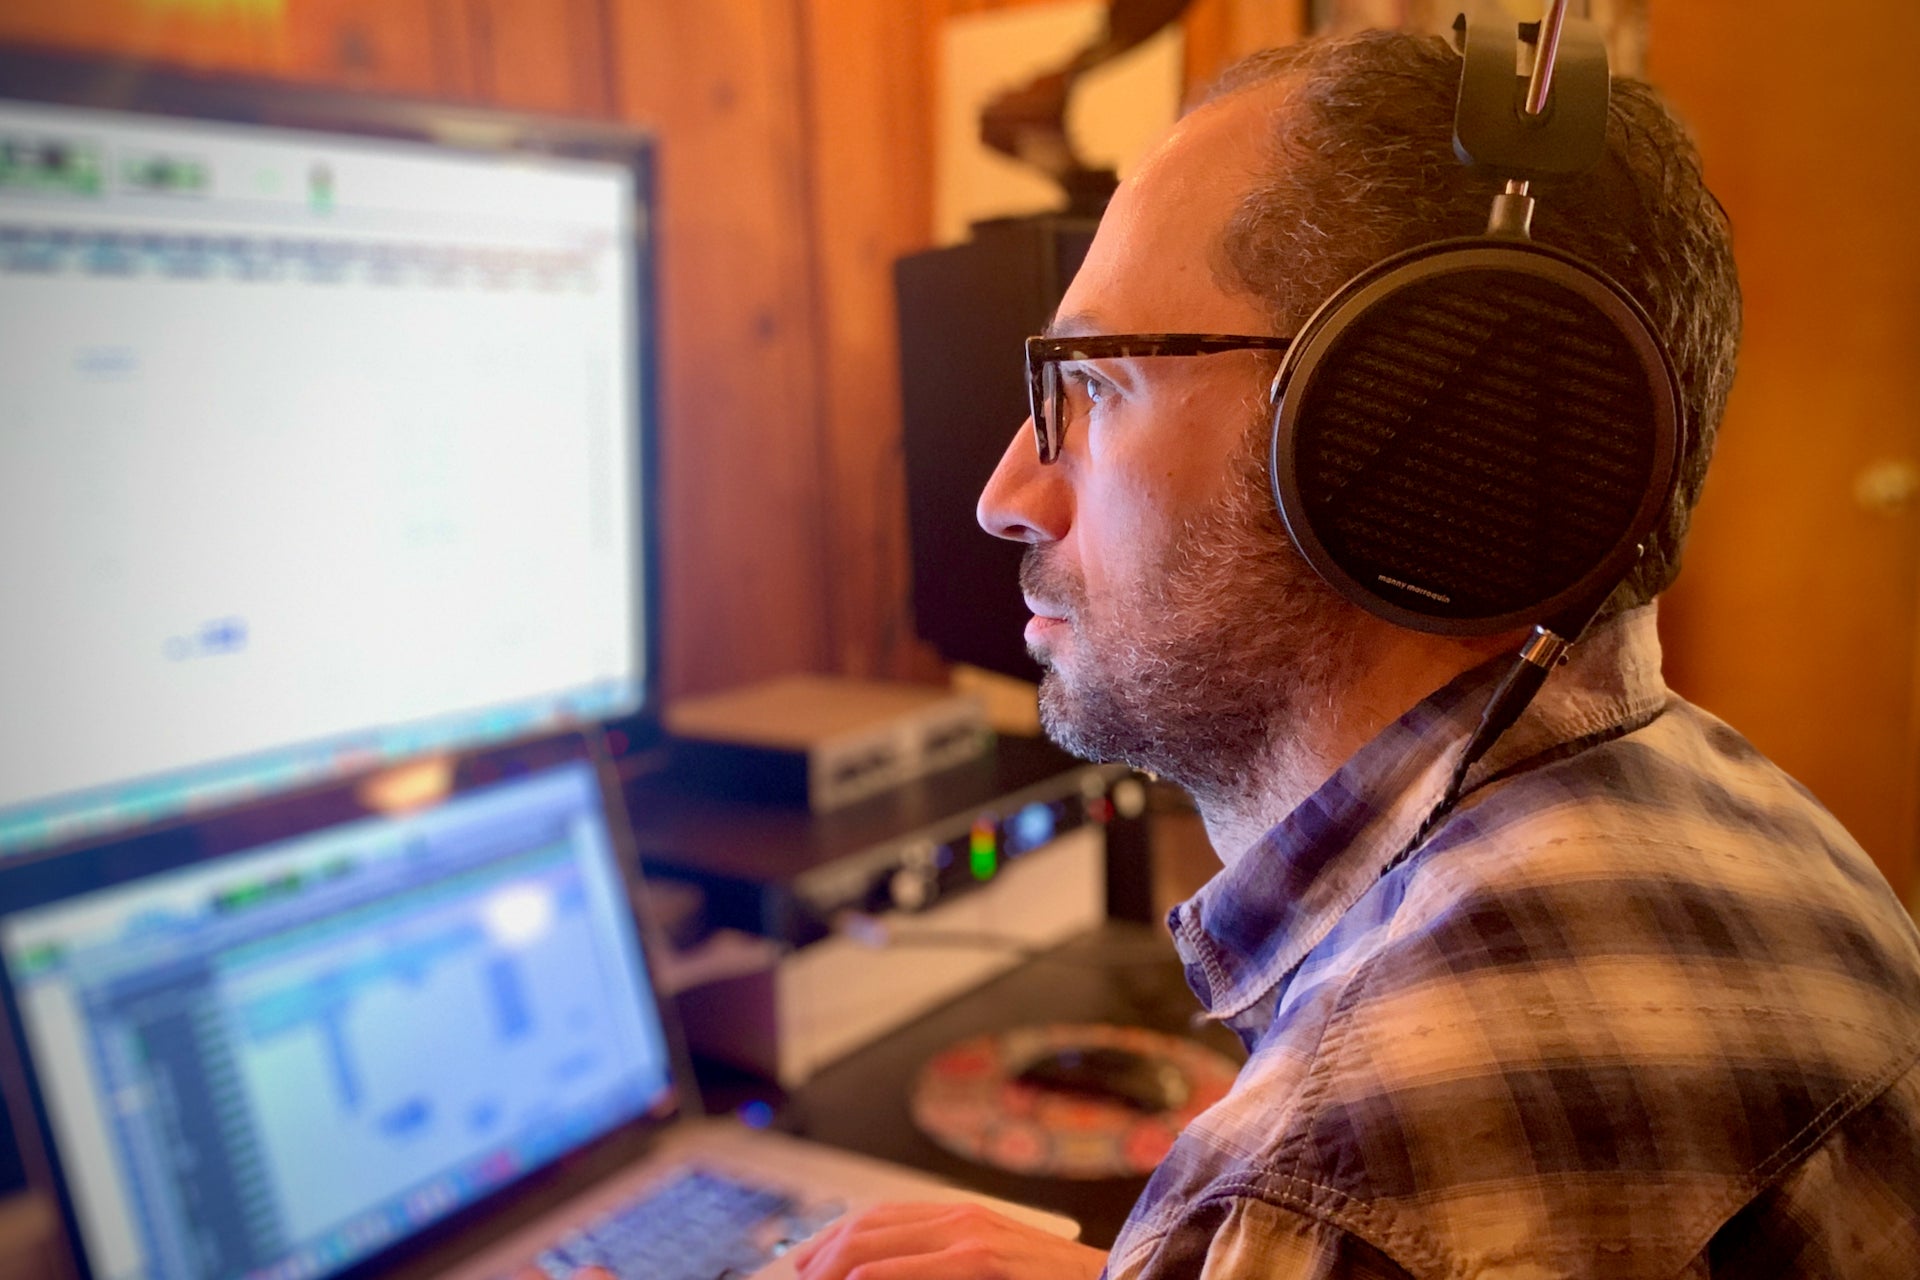 Brian Marsella in the studio with his MM-500 headphones